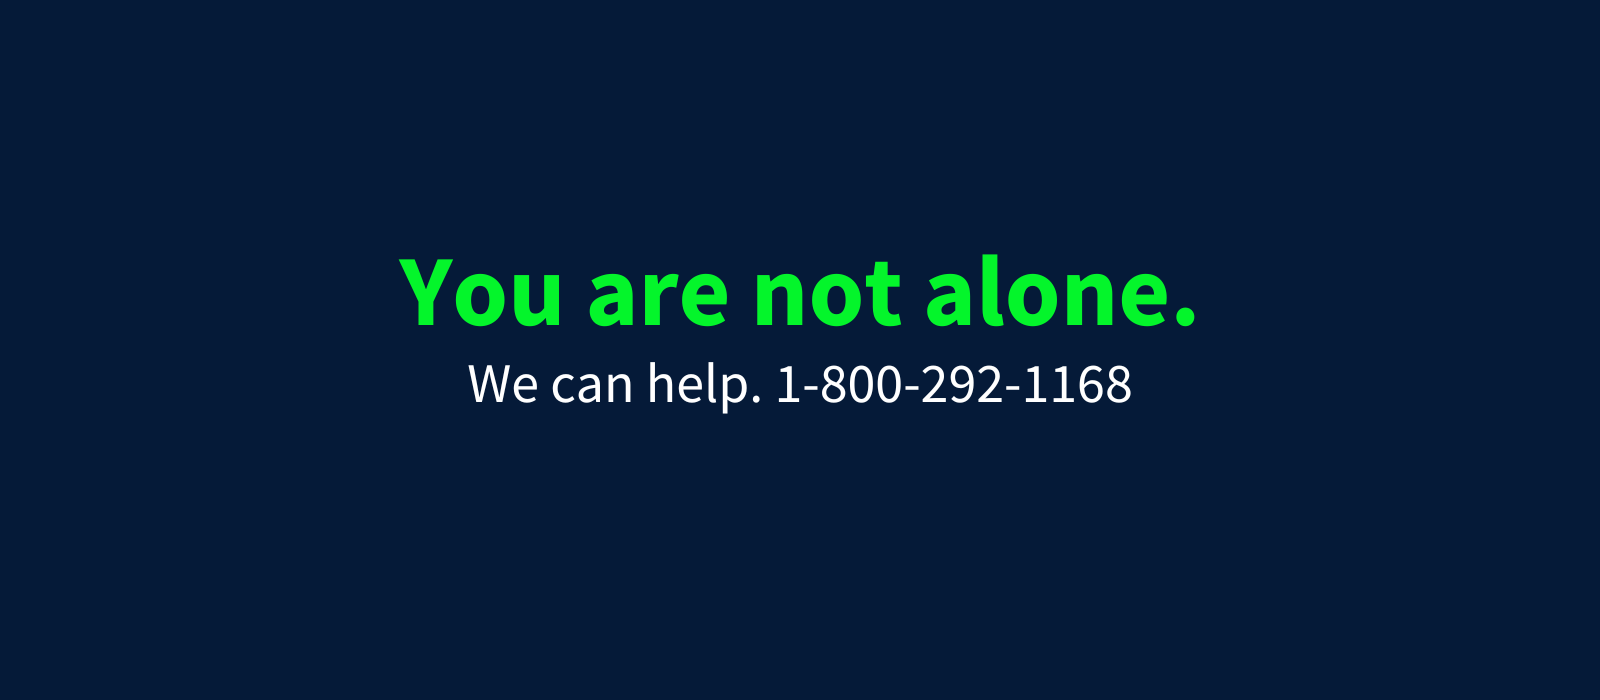 You are not alone. We can help. 1-800-292-1168